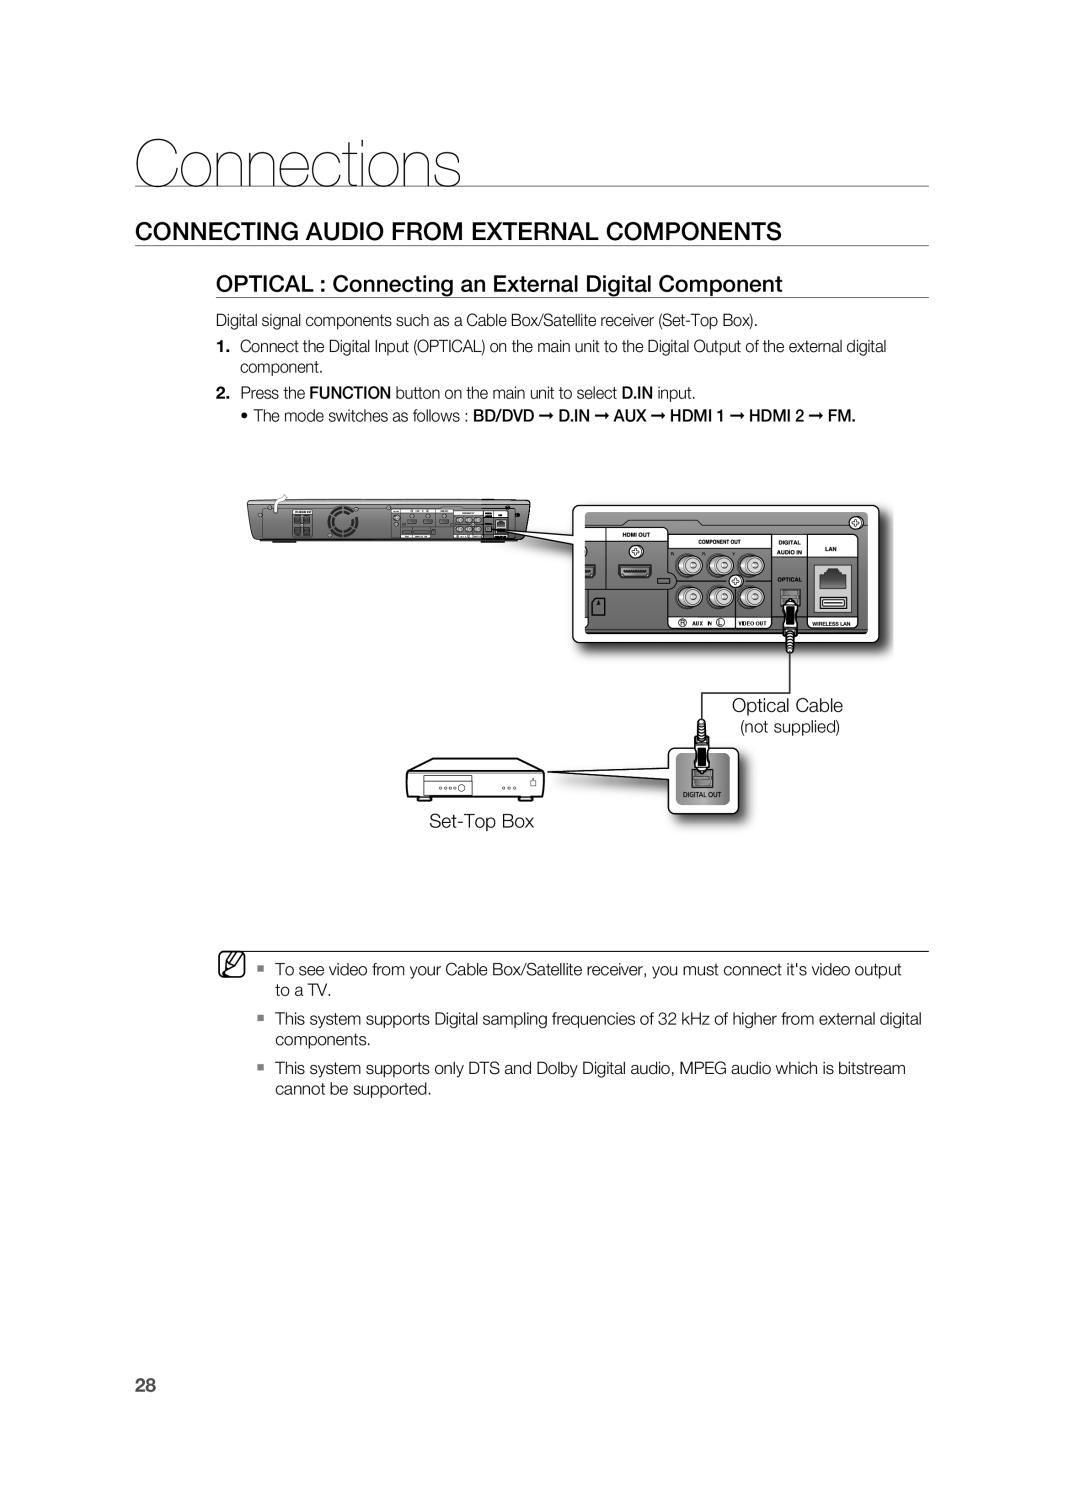 Samsung HT-BD3252 user manual Connecting Audio From External Components, Connections, Optical Cable, Set-TopBox 